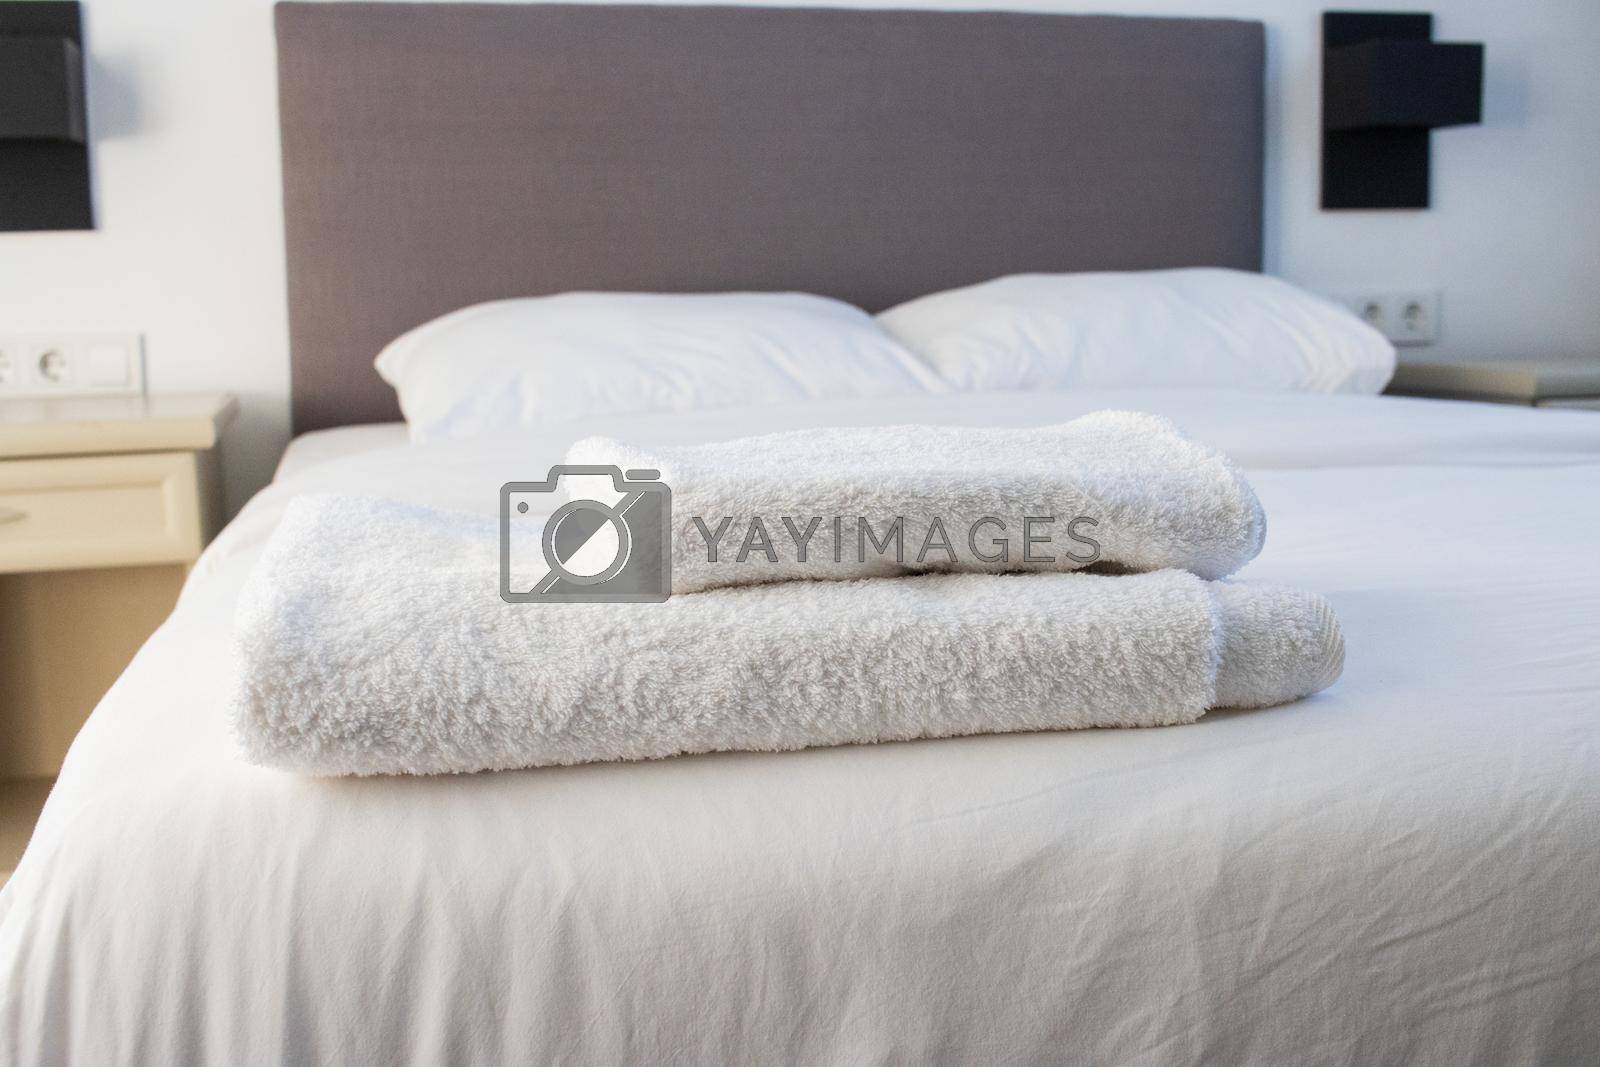 Royalty free image of White clean towels stacked on the hotel bed by senkaya